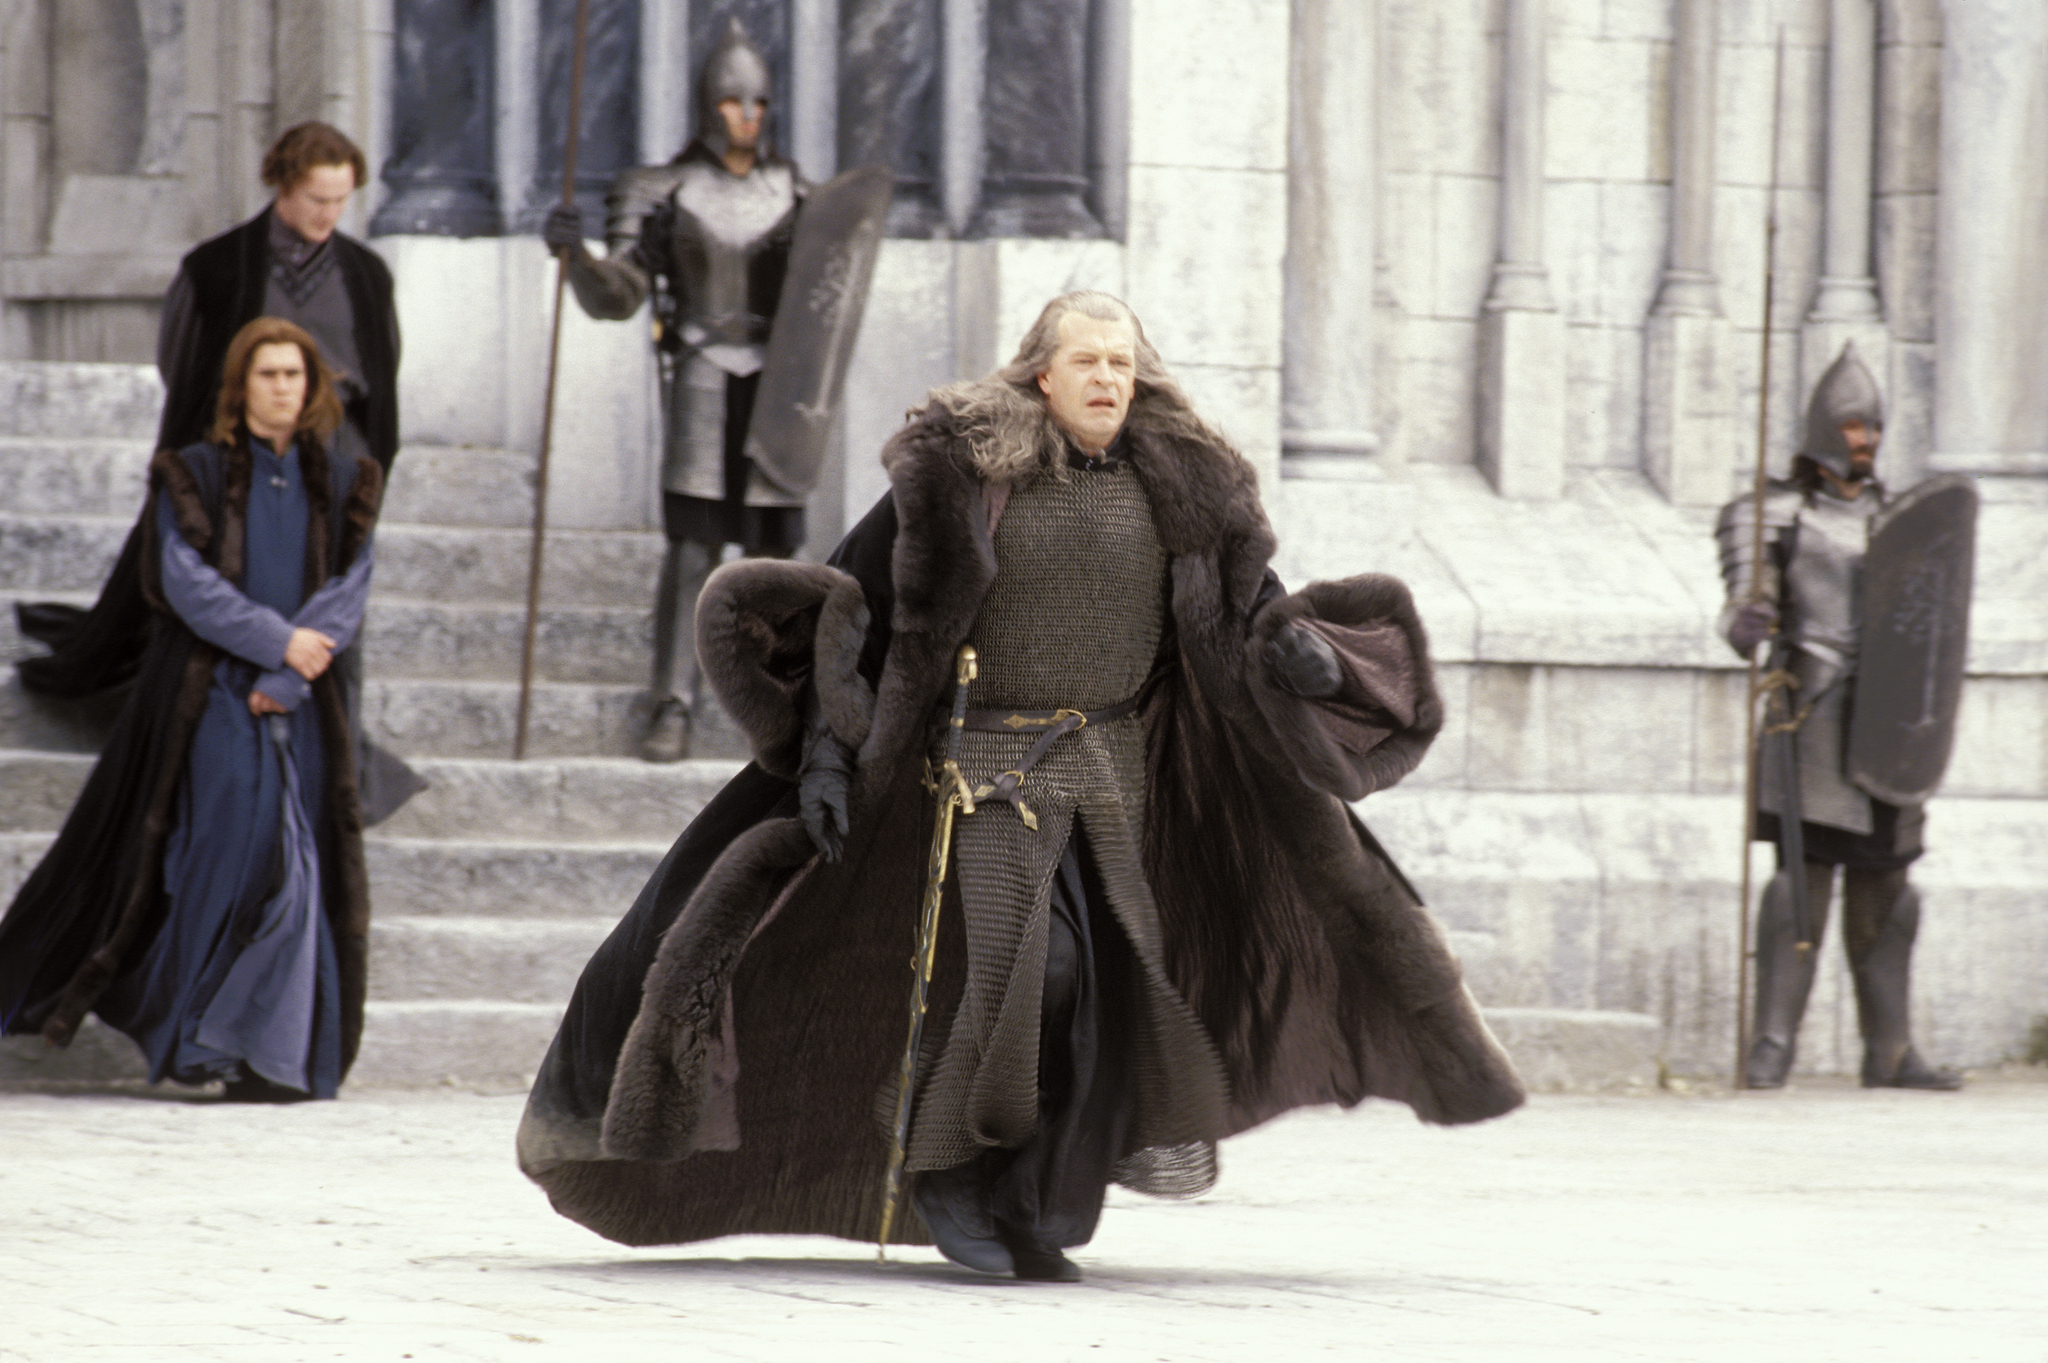 Eddie Campbell, John Noble, and Jason Hood in The Lord of the Rings: The Return of the King (2003)